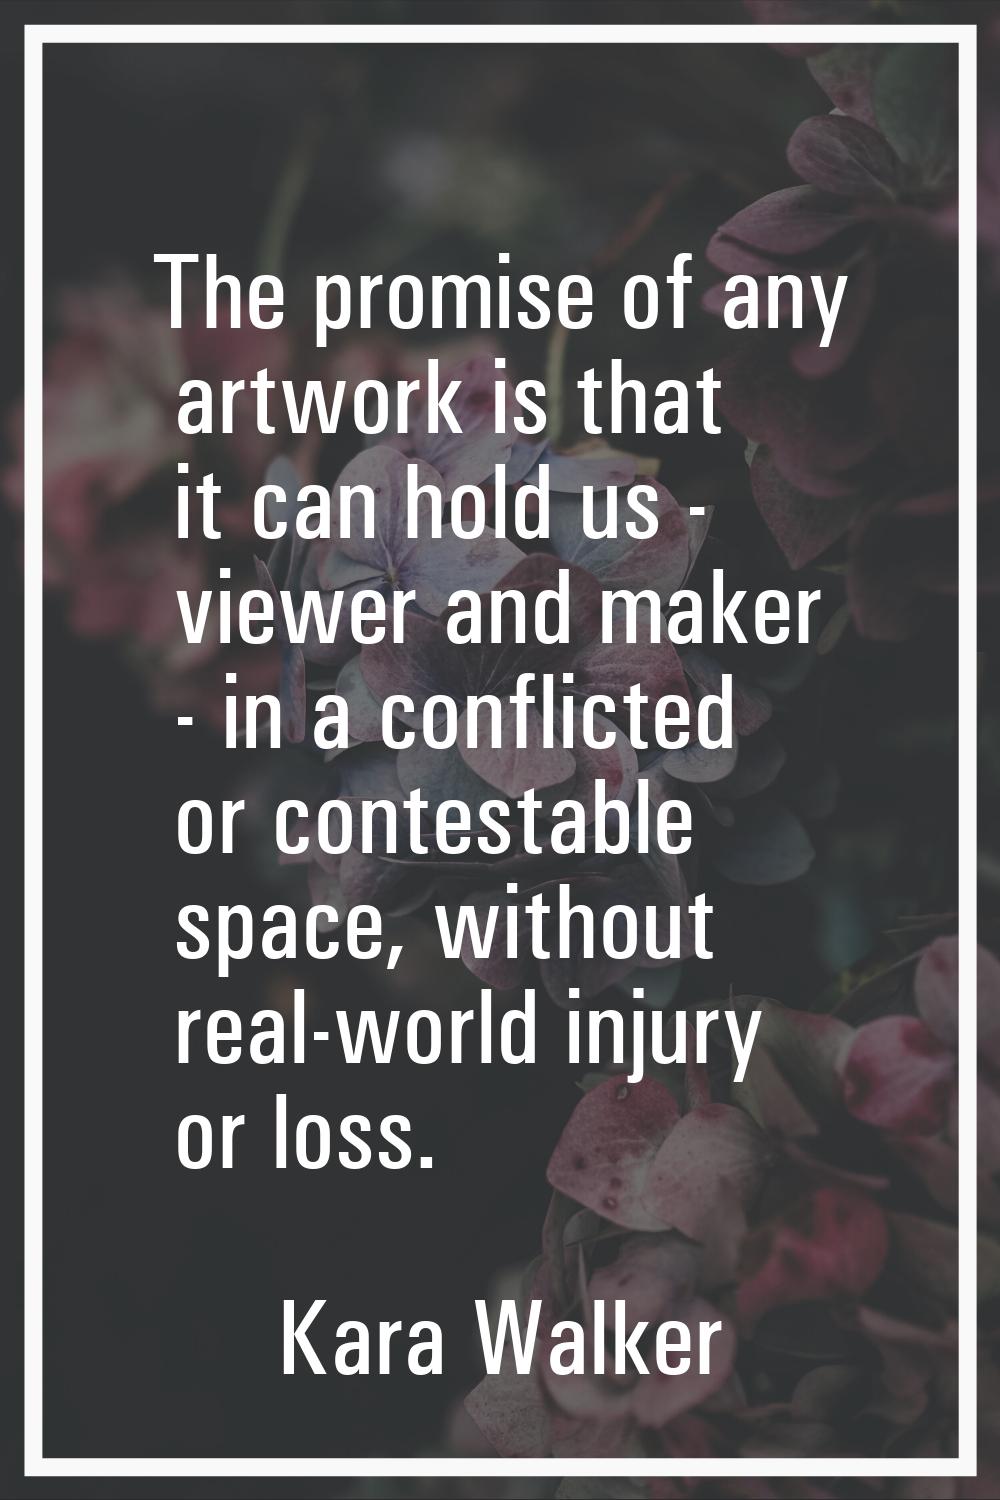 The promise of any artwork is that it can hold us - viewer and maker - in a conflicted or contestab